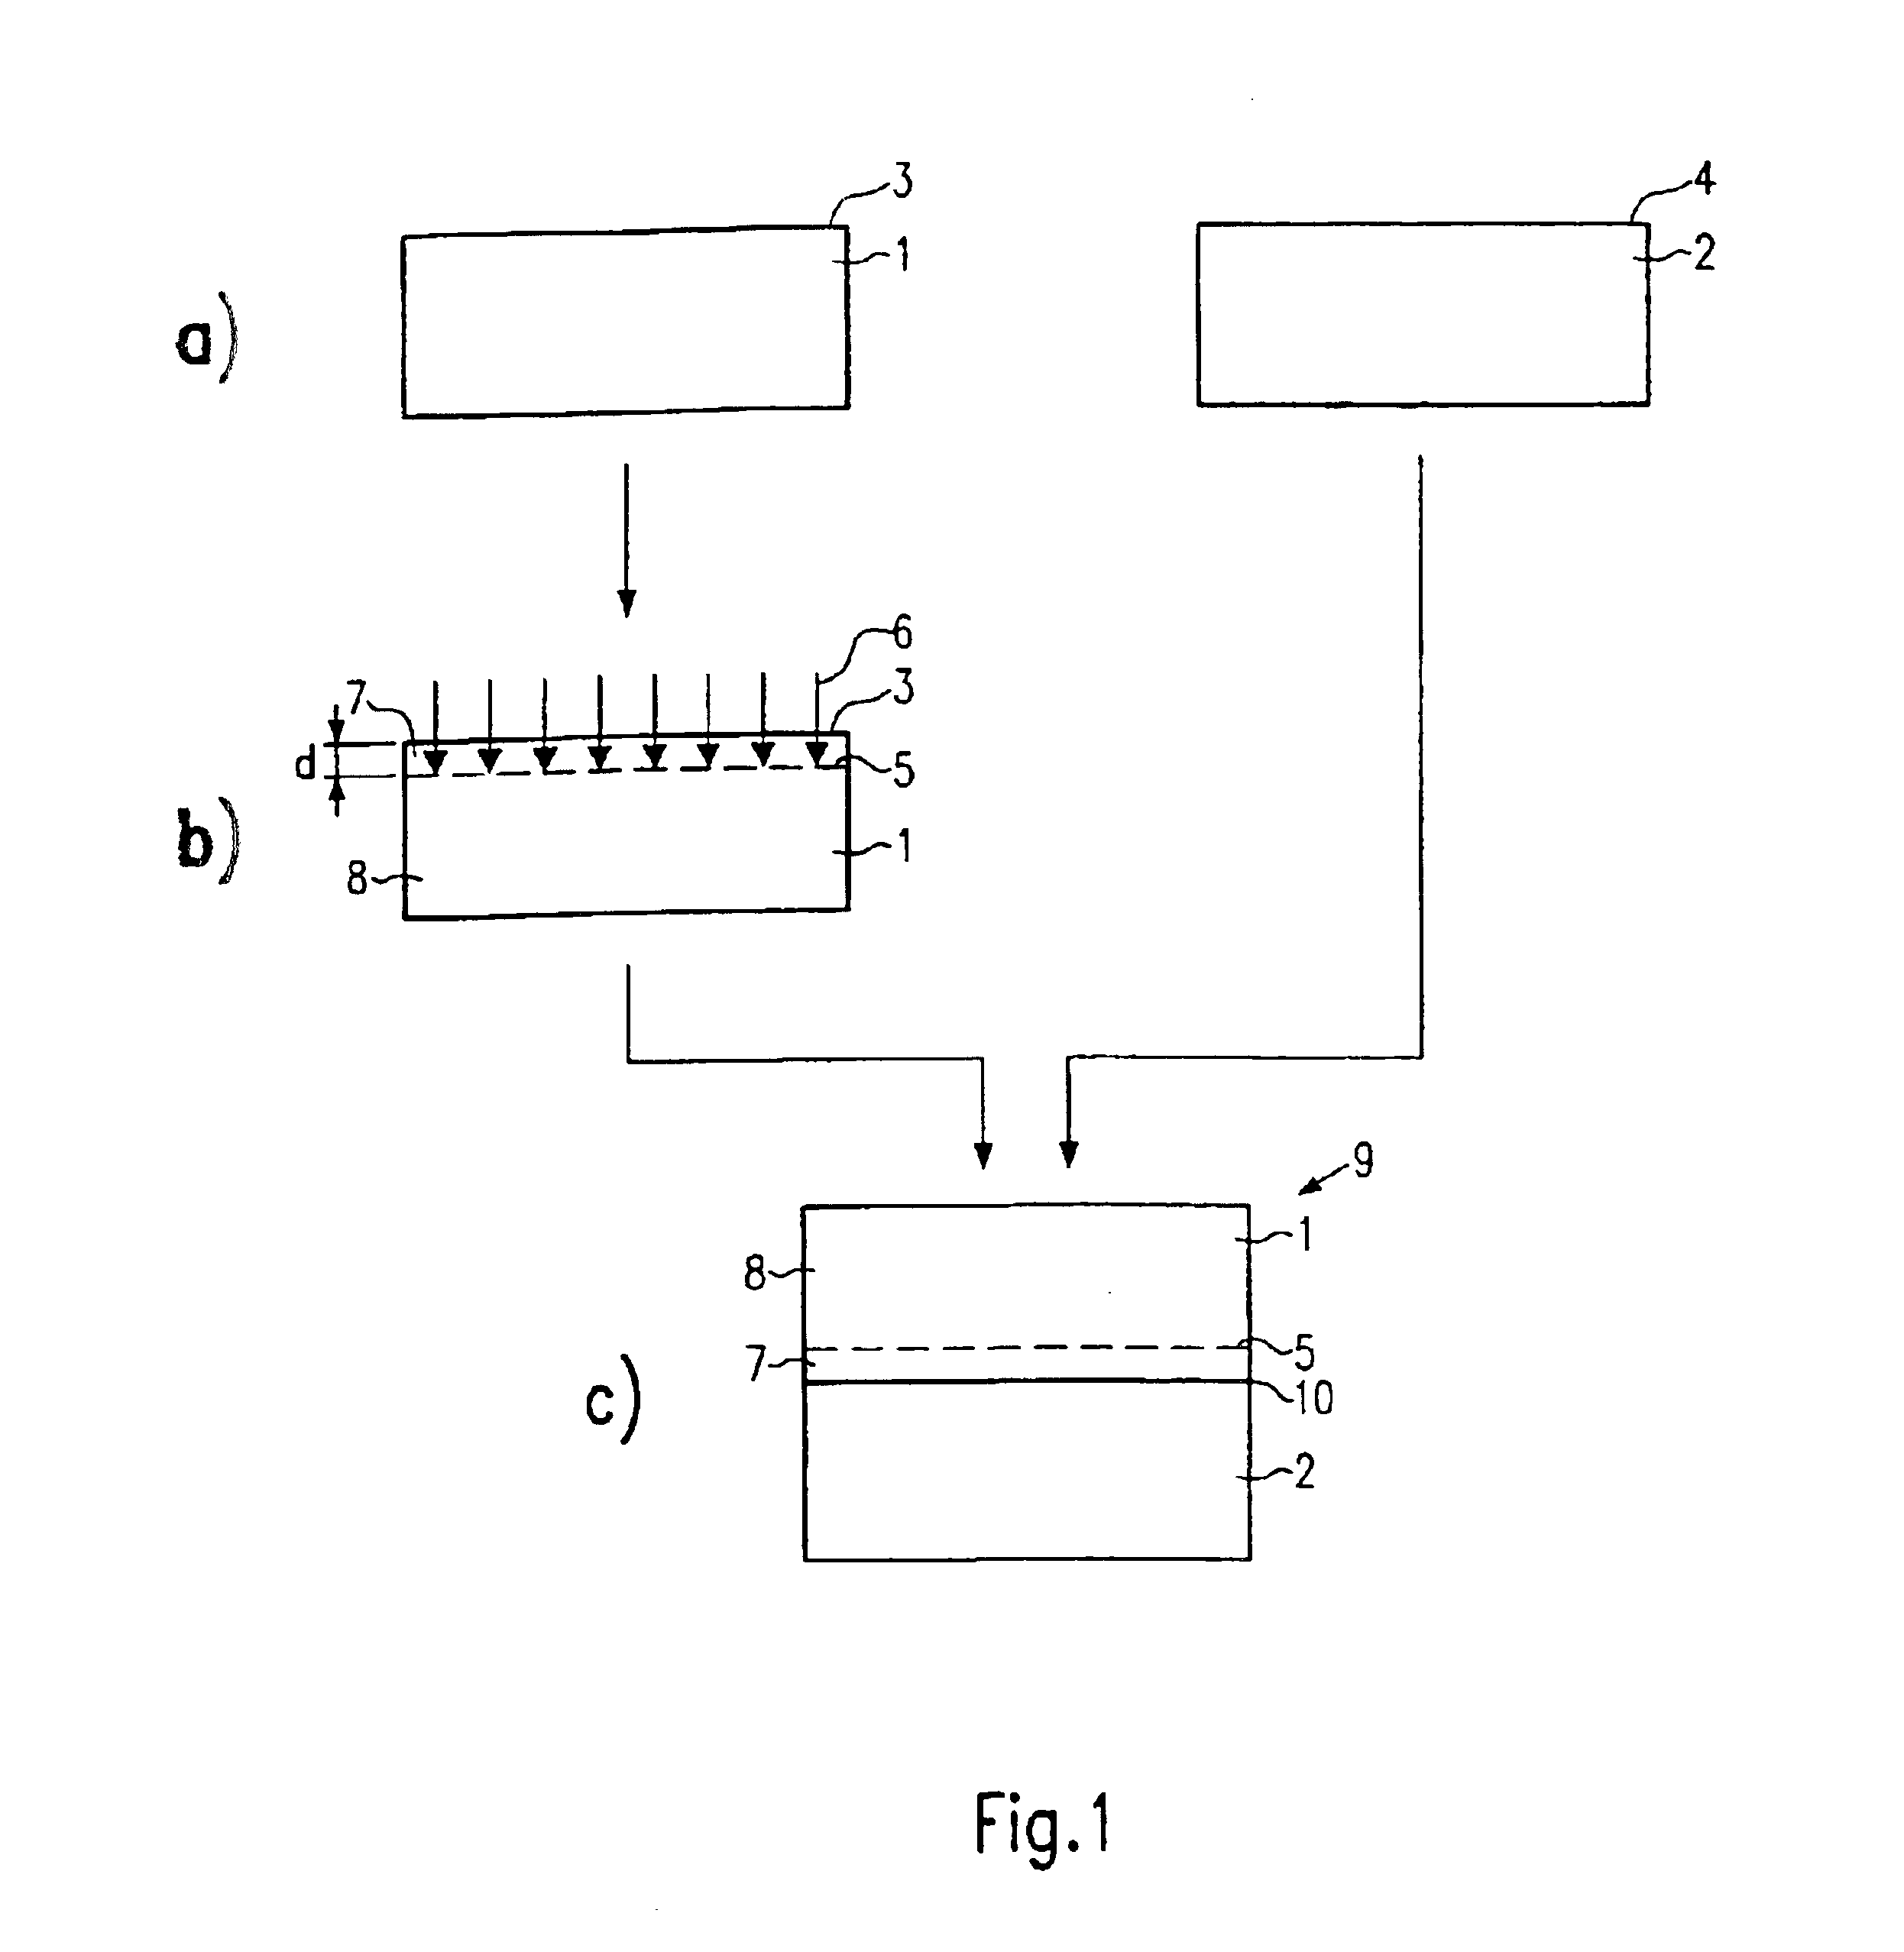 Method of manufacturing a wafer